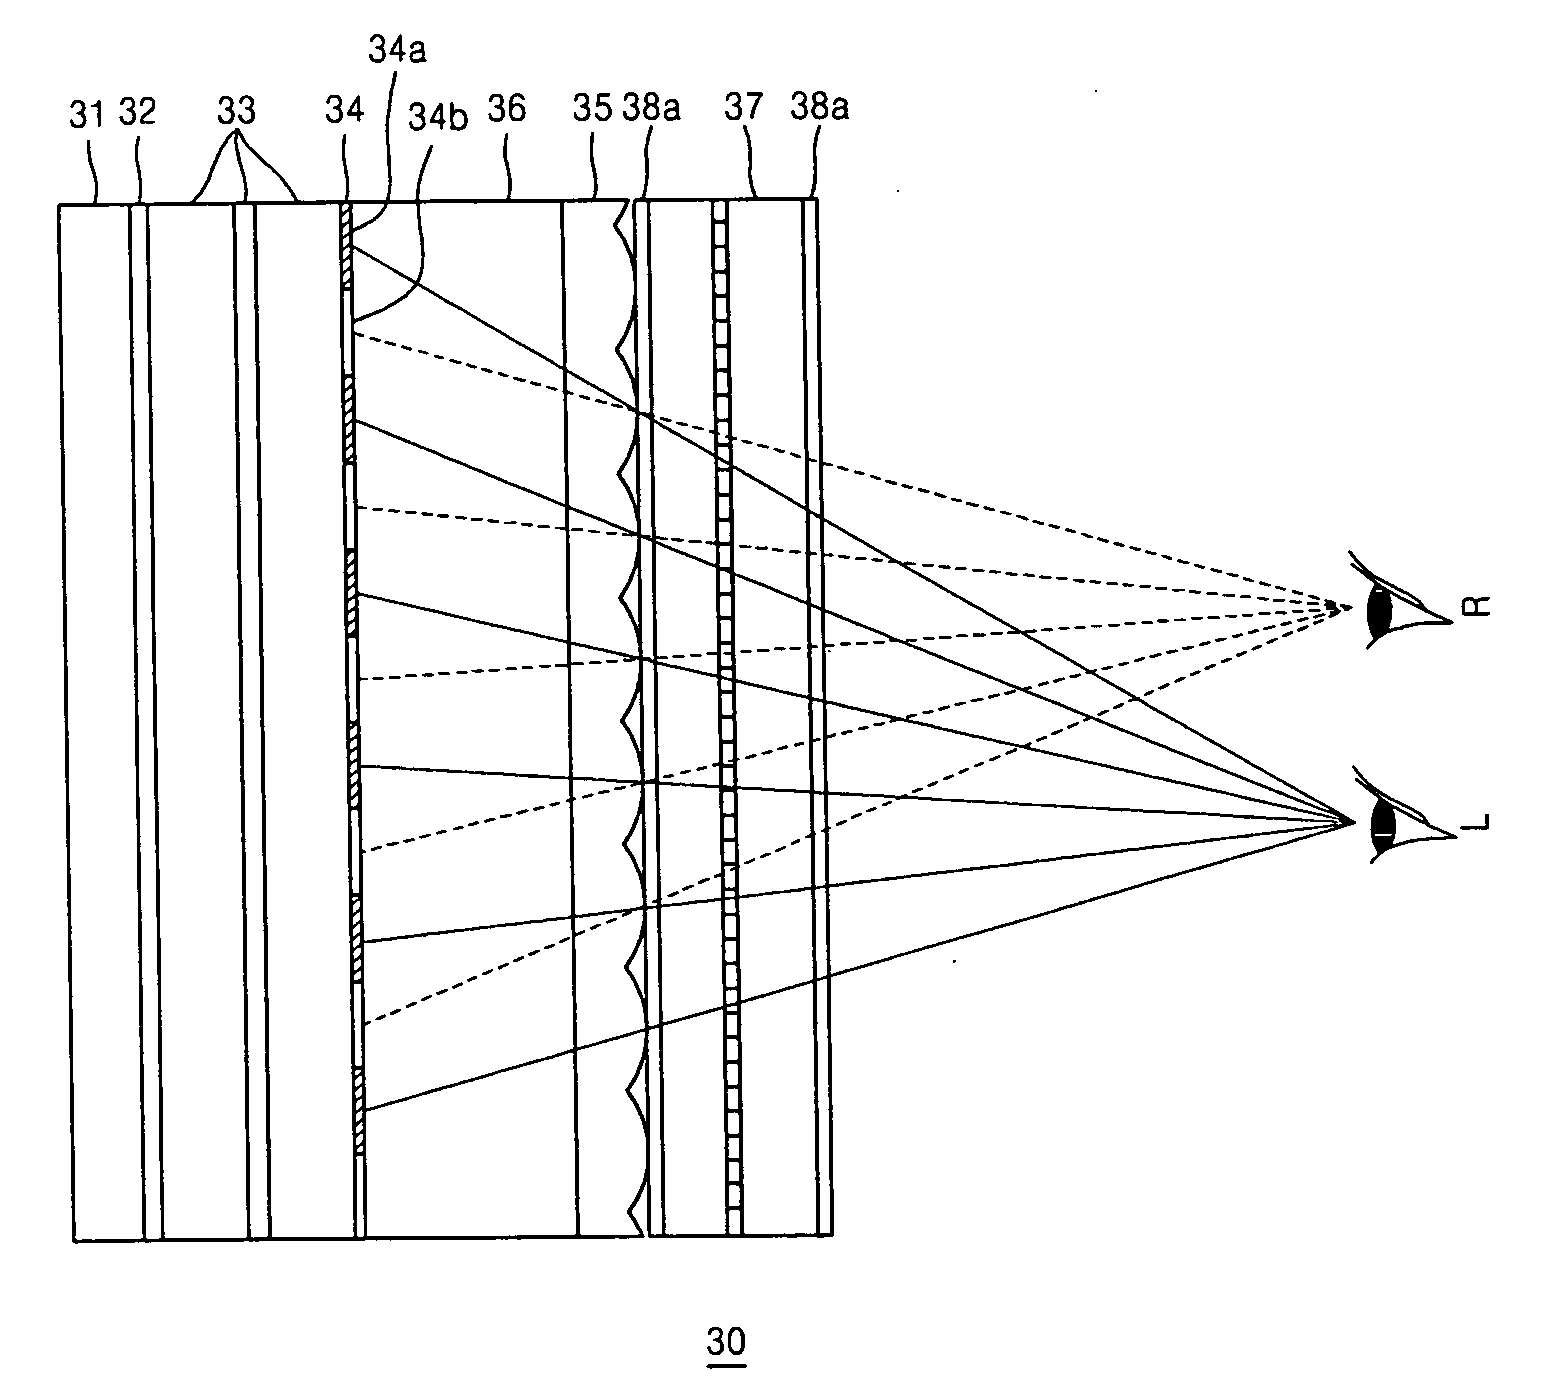 High resolution 2D-3D switchable autostereoscopic display apparatus